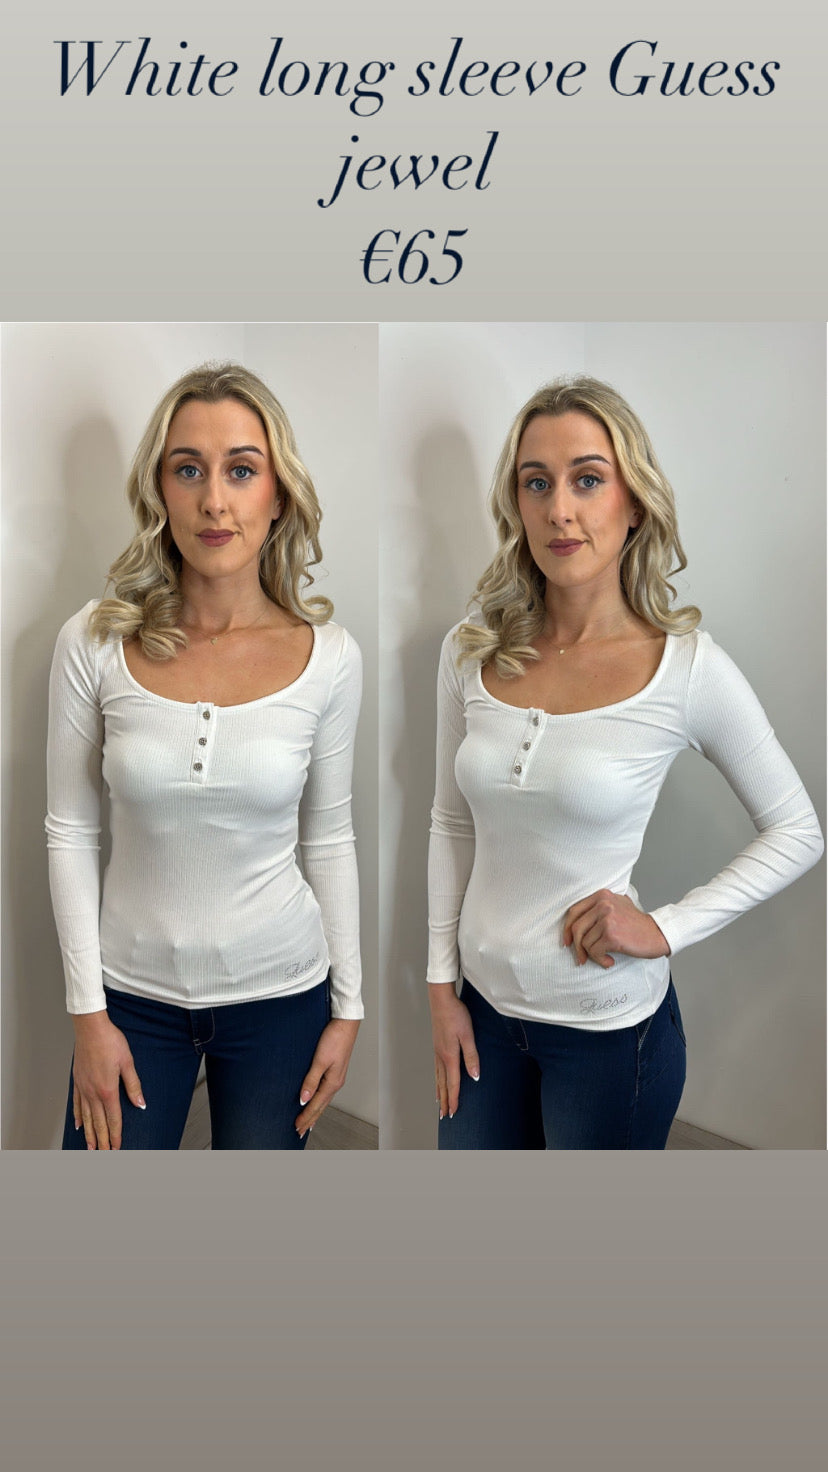 White long sleeve Guess jewel button top